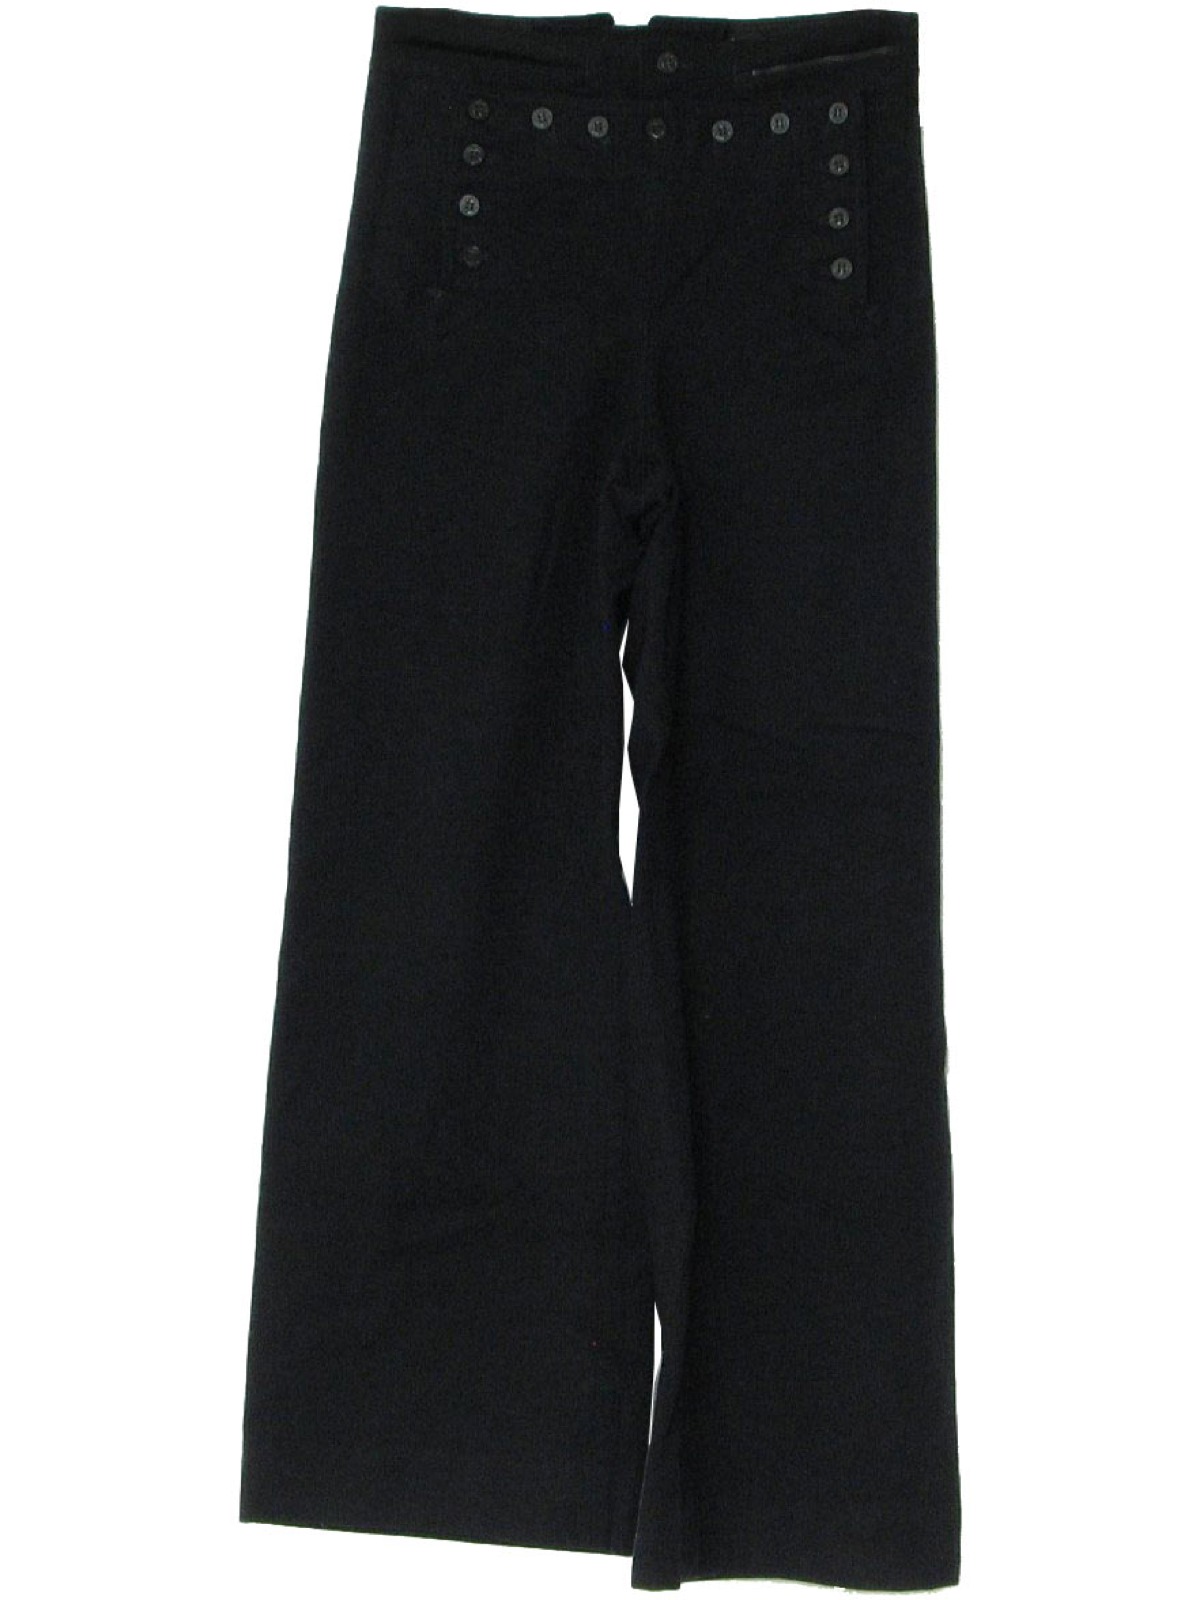 Retro 1960's Bellbottom Pants (Navy Issue) : 60s -Navy Issue- Mens midnight  blue, soft wool bell bottom pants. Thirteen button style with front flap,  four front pockets, and laced drawstring adjustment at